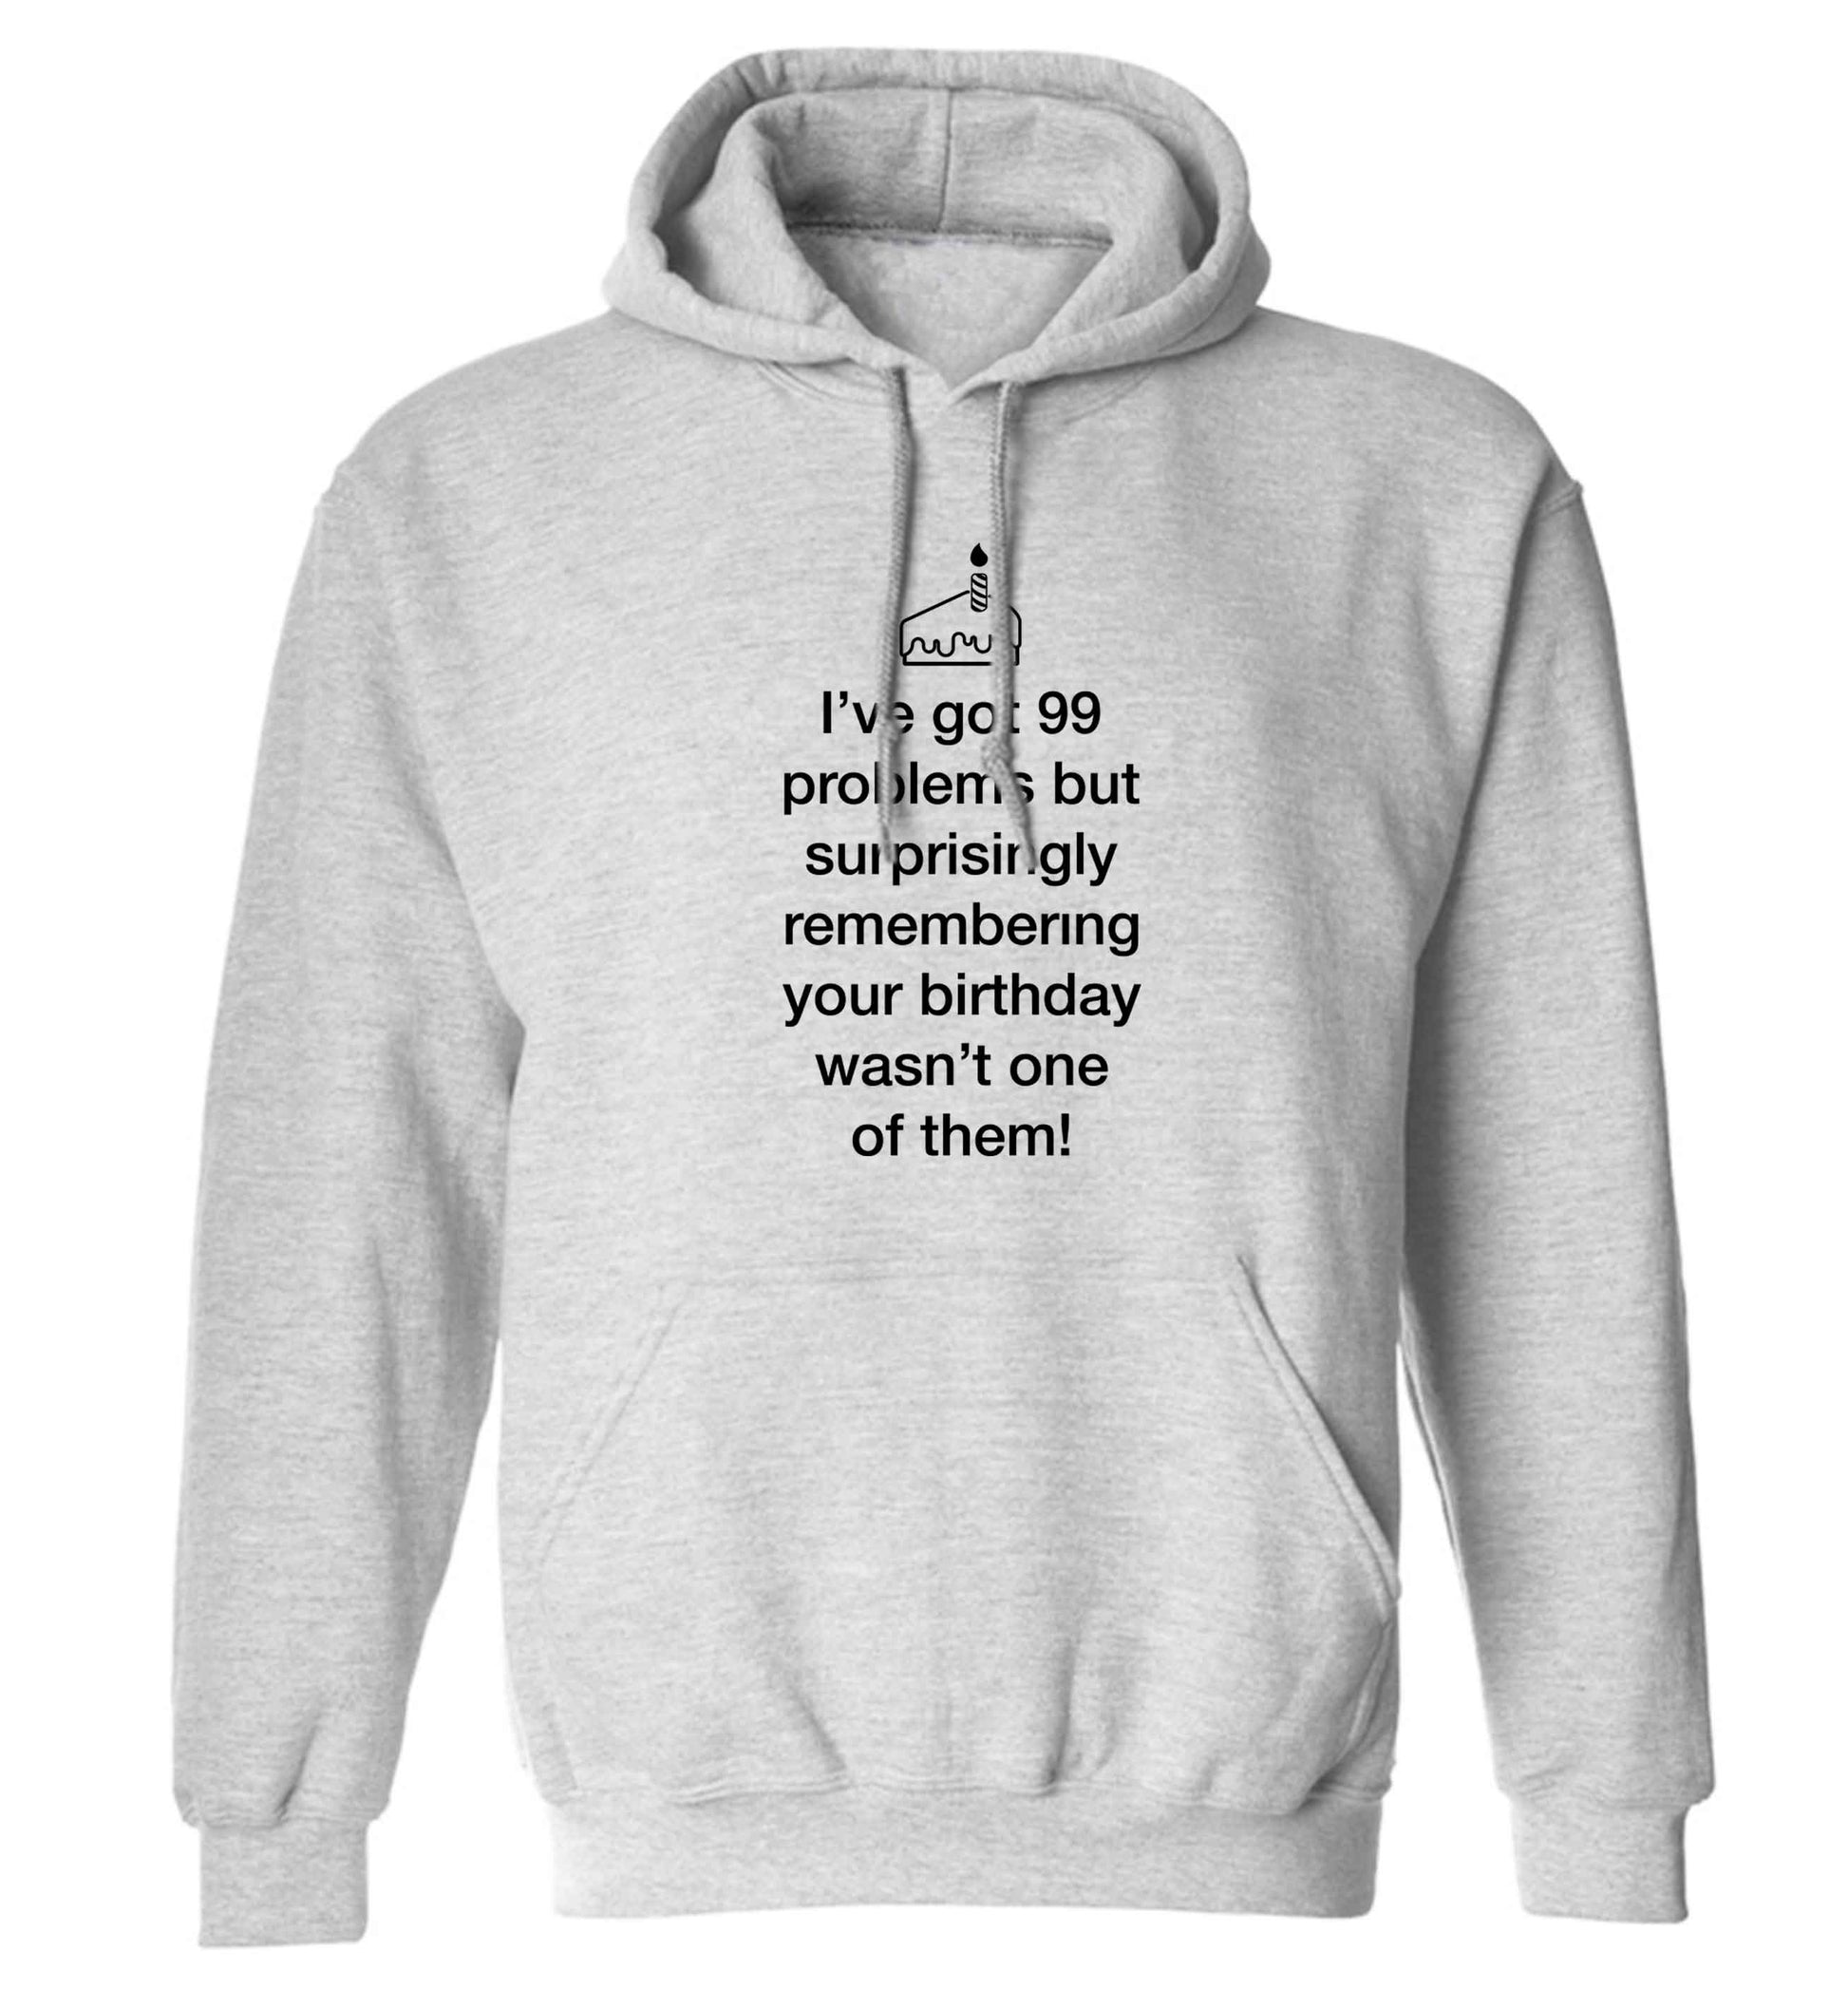 I've got 99 problems but surprisingly remembering your birthday wasn't one of them! adults unisex grey hoodie 2XL